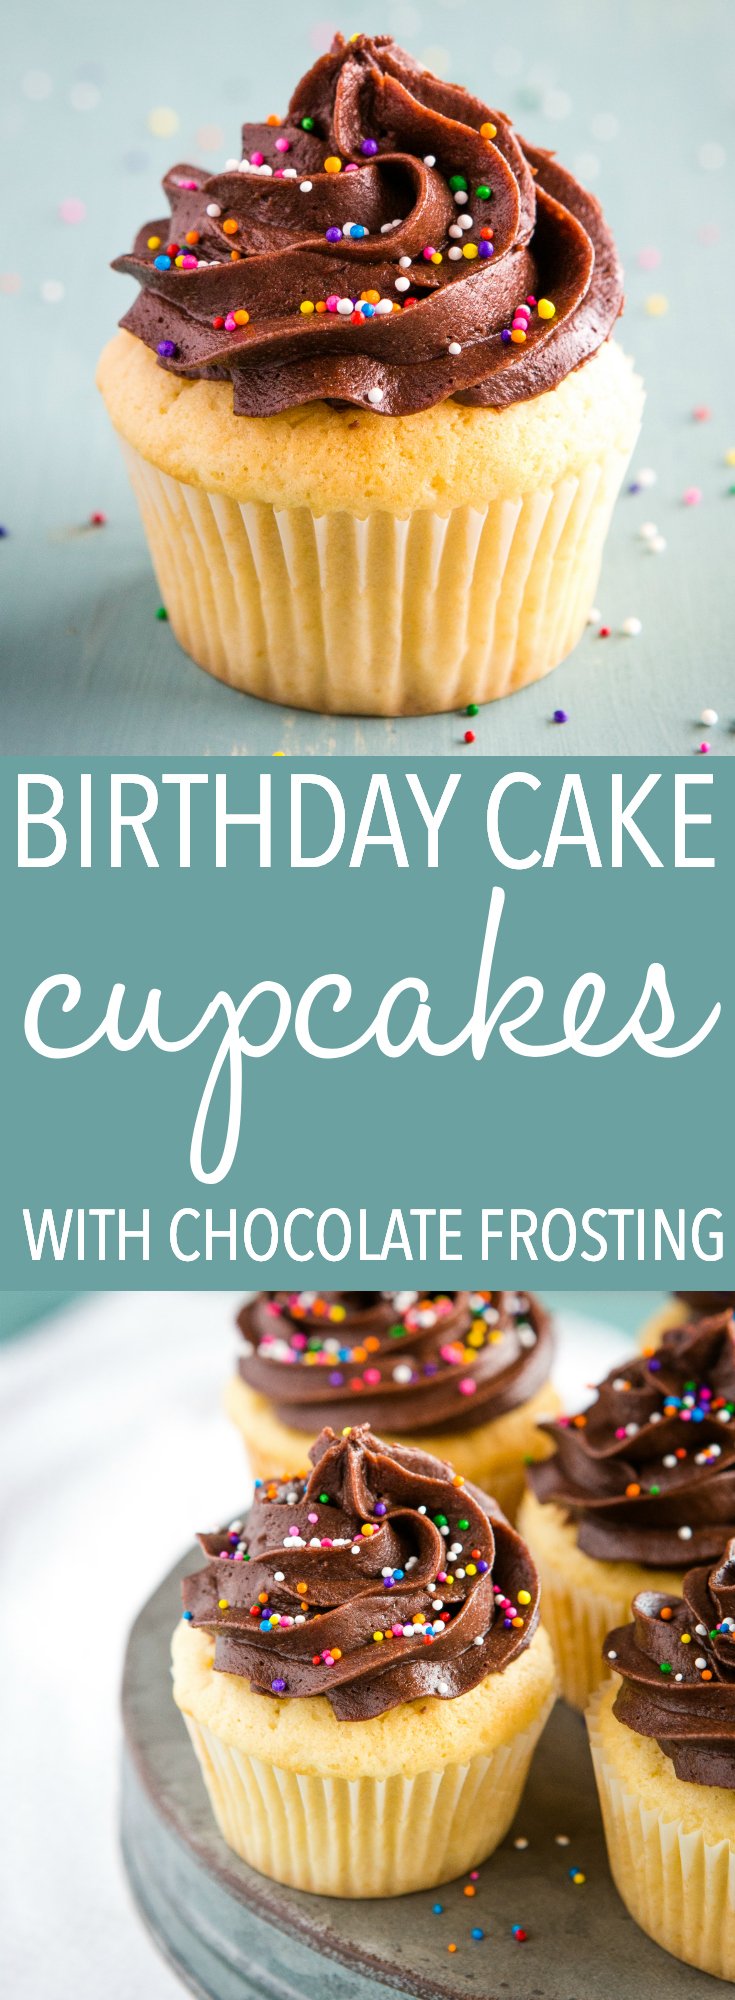 These Birthday Cake Cupcakes with Chocolate Frosting are the perfect moist and delicious yellow cupcakes with creamy chocolate buttercream and sprinkles! What better way to celebrate a special day!?! #birthdaycake #birthday #cake #cupcakes #sprinkles #yellowcake #buttercream #buttercake #cupcake #celebrate #dessert #sweet #treat #recipe #foodblogger via @busybakerblog